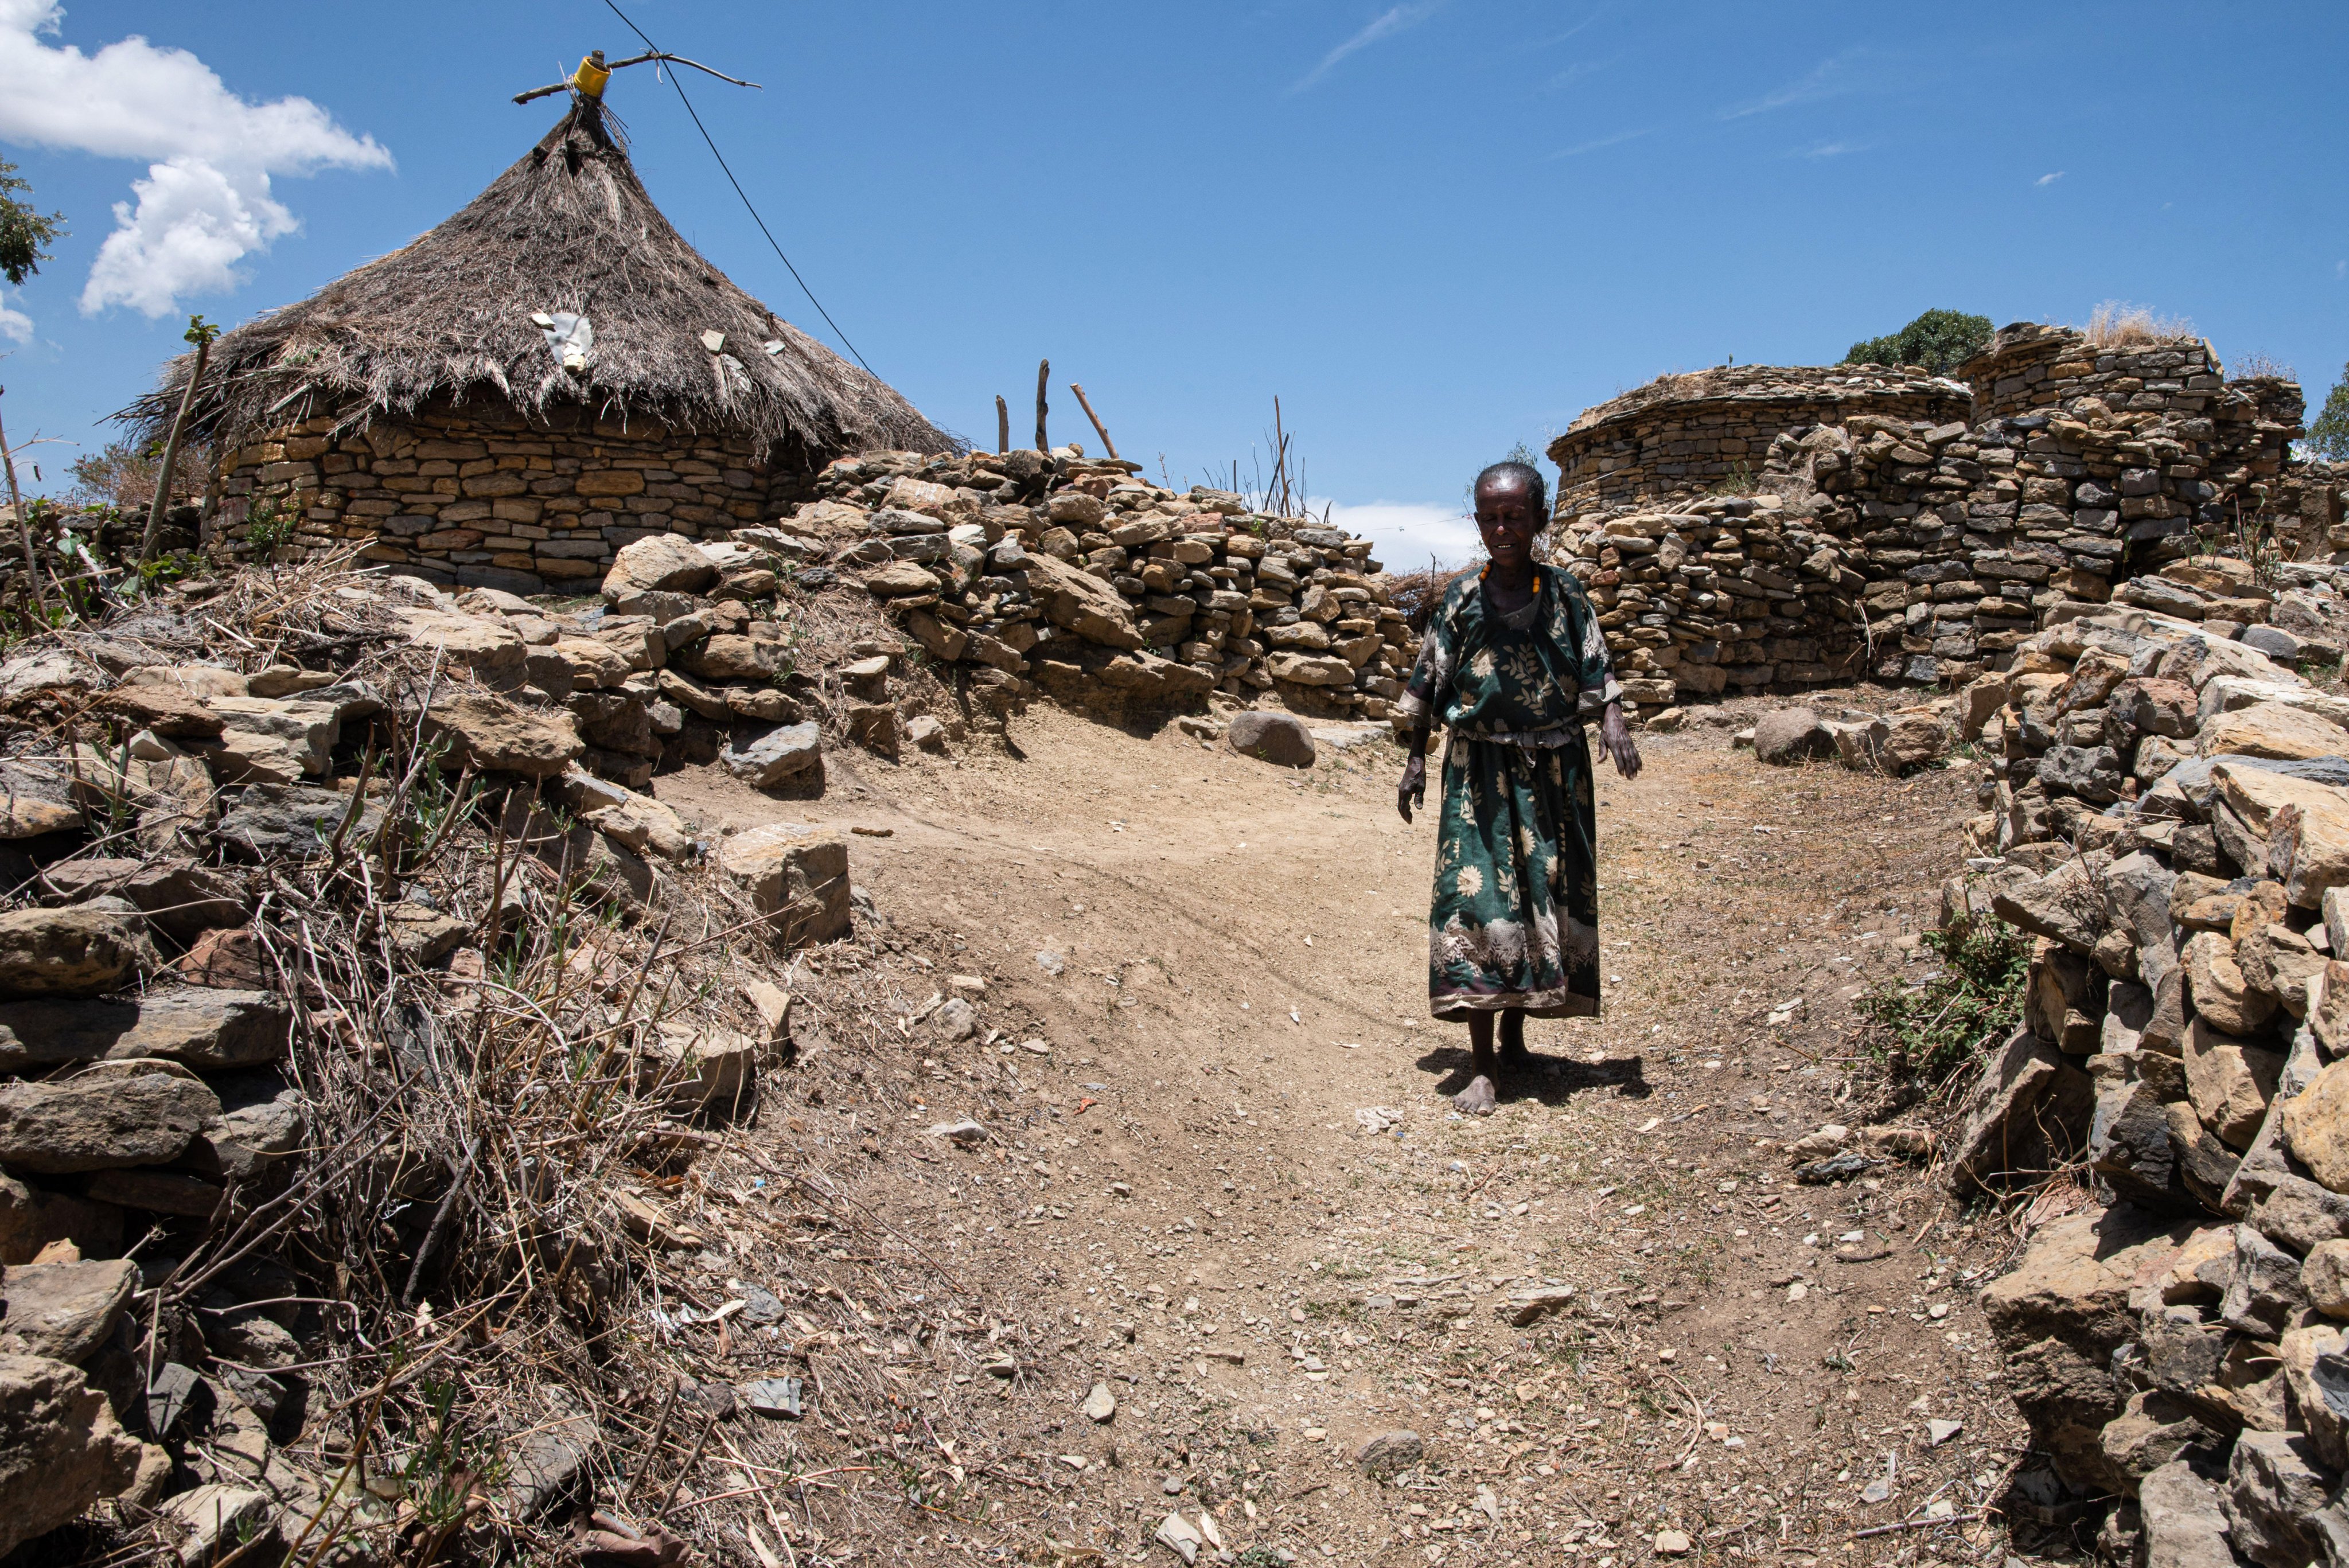 A woman from a small village near Samre town in Tigray, Ethiopia, on May 26 last year. Ethiopia saw one of the bloodiest wars of the 21st century which led to widespread starvation. The African country has applied for debt restructuring under the G20’s Common Framework. Photo: Getty Images